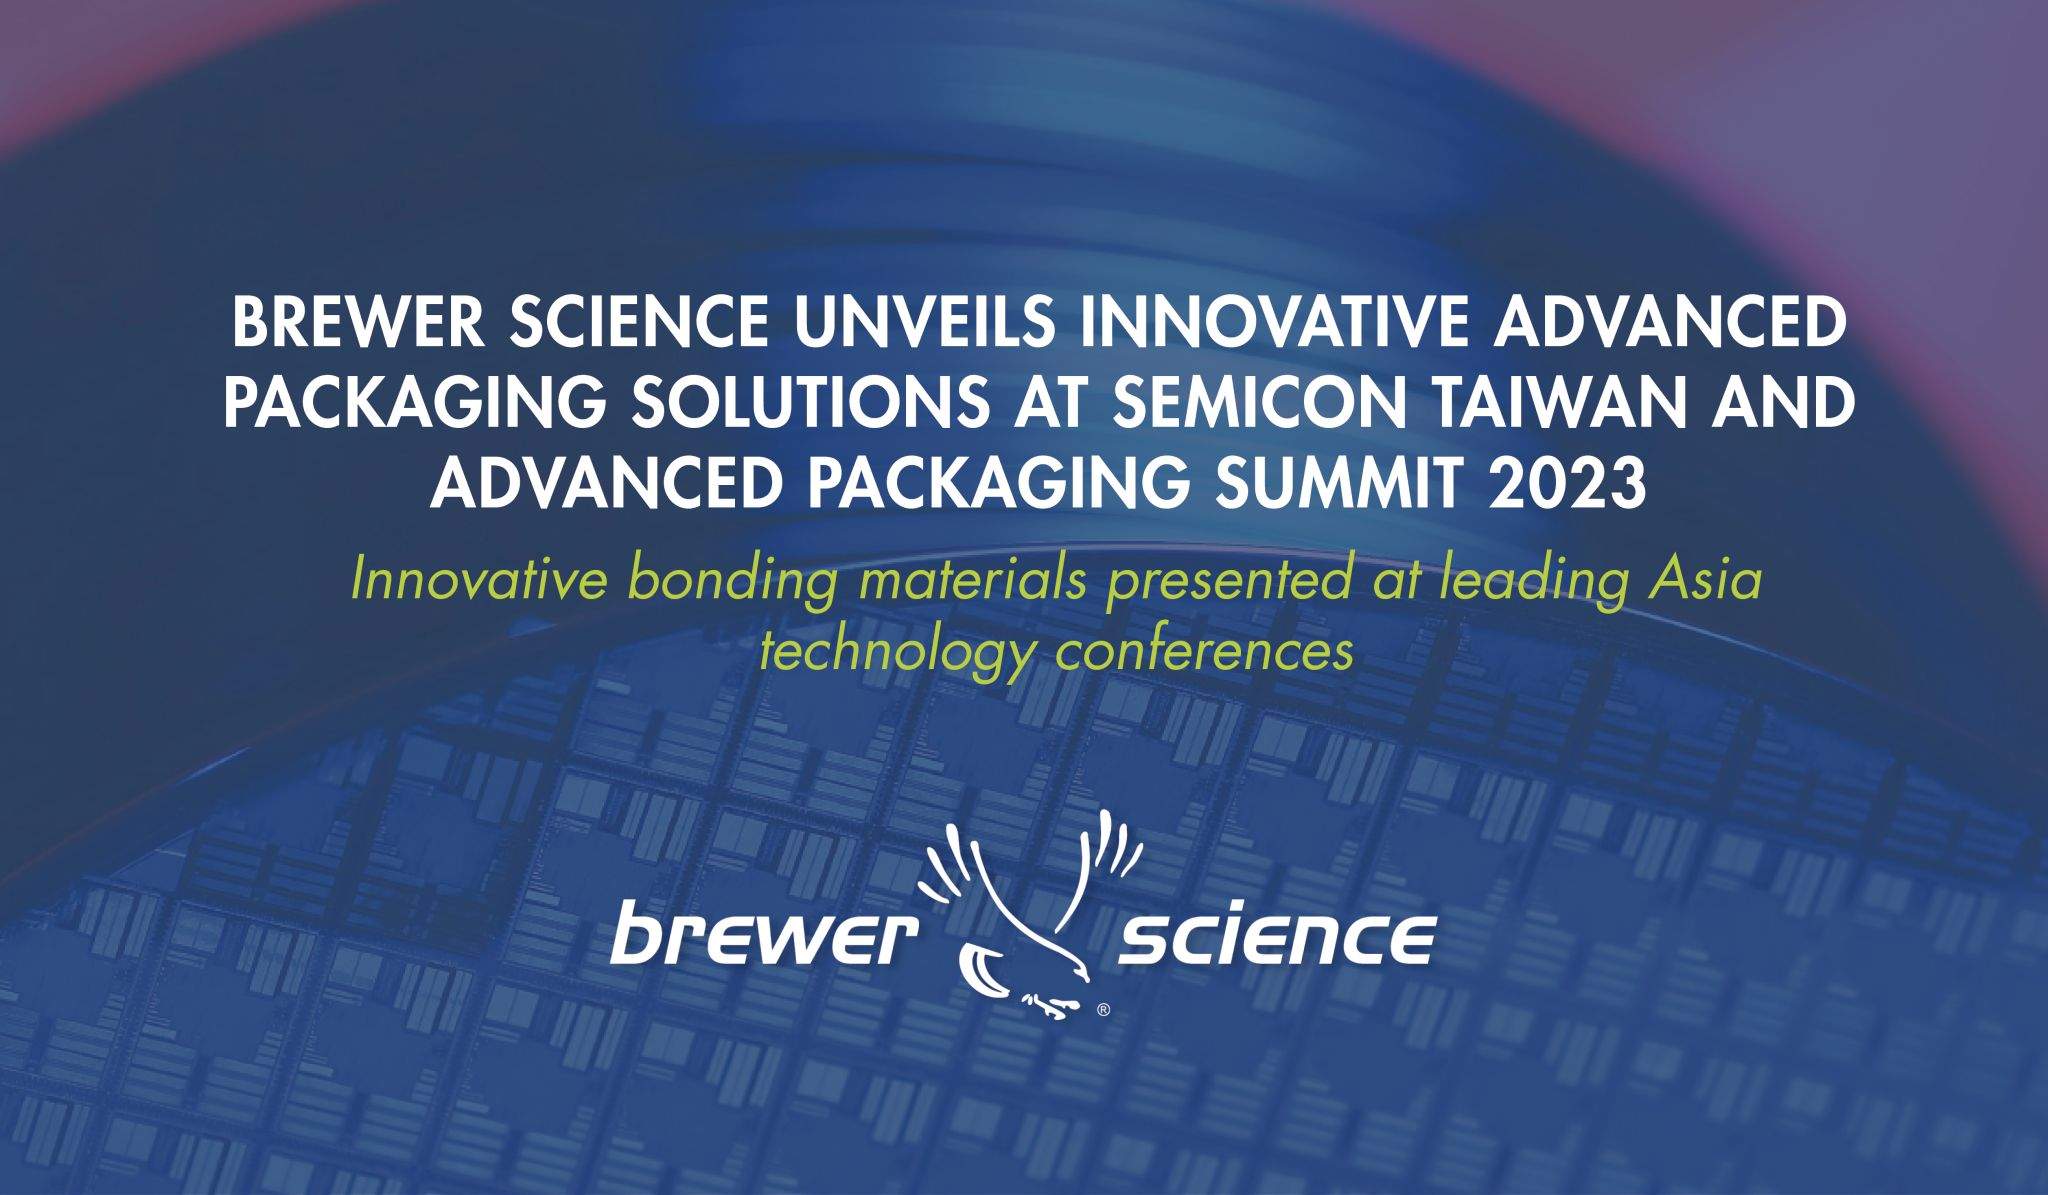 Brewer Science unveils innovative advanced packaging solutions at SEMICON Taiwan and Advanced Packaging Summit 2023